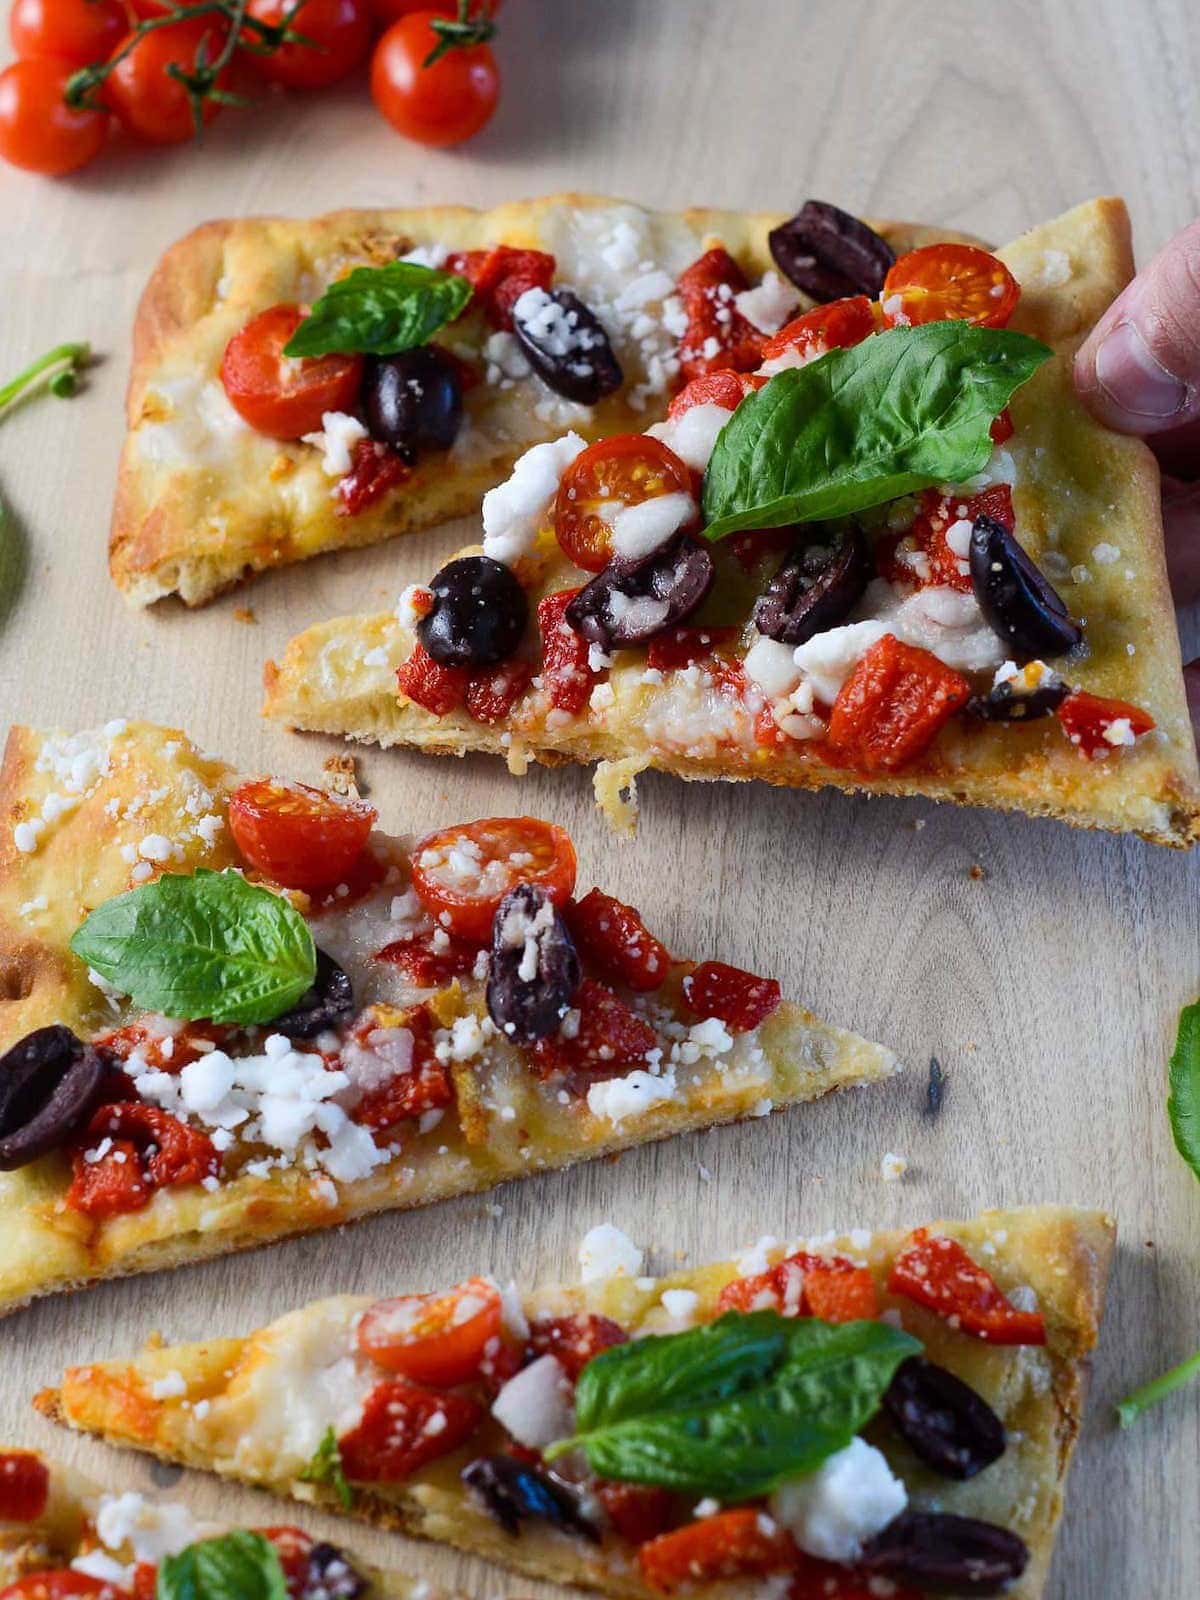 vegan flatbread pizza with a hand picking up the pizza.